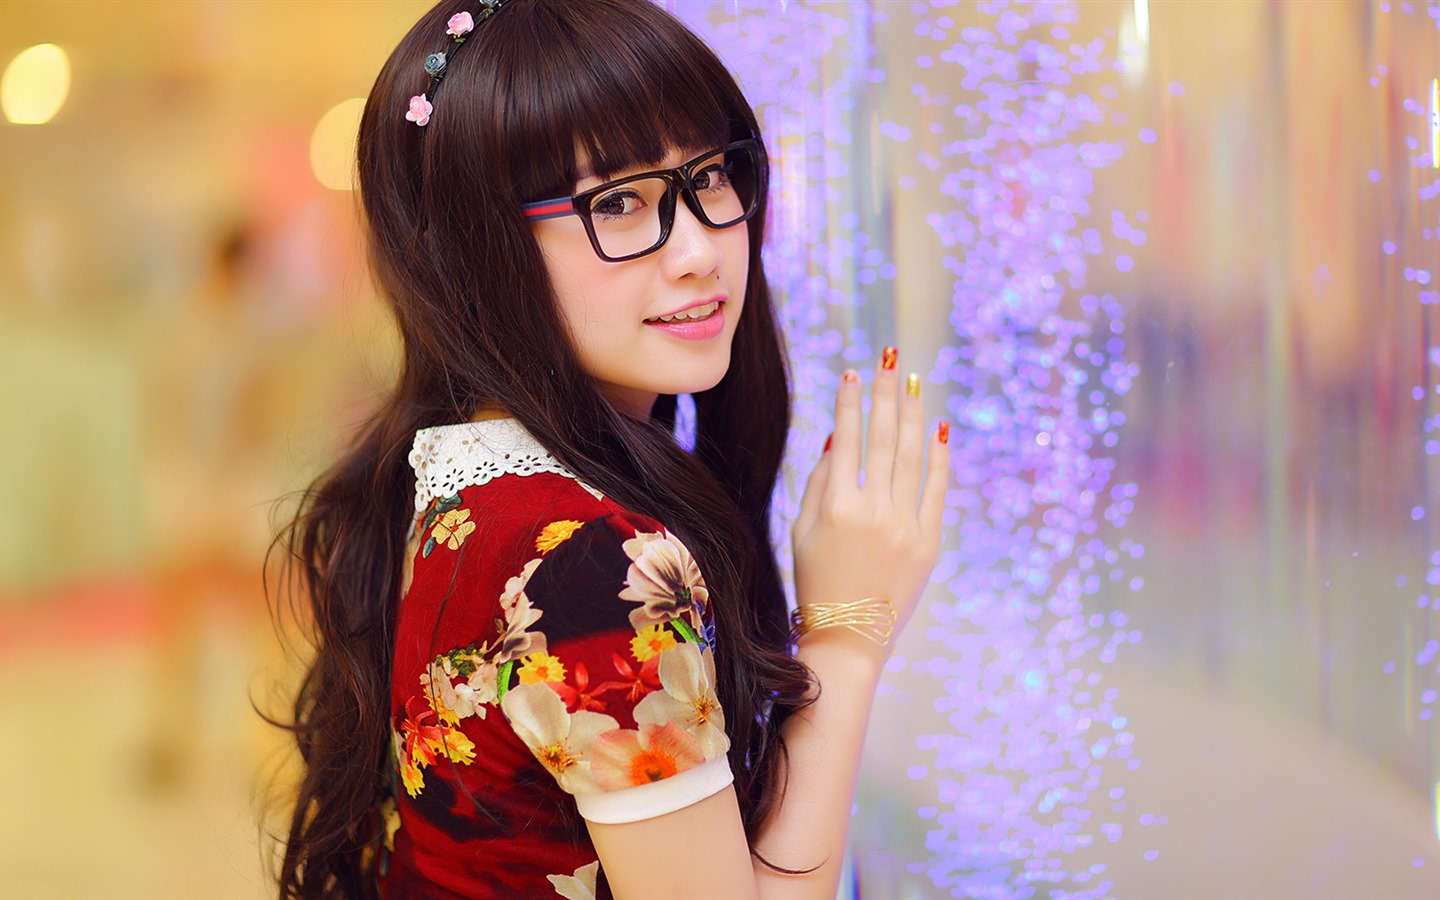 Pure and lovely young Asian girl HD wallpapers collection (2) #28 - 1440x900